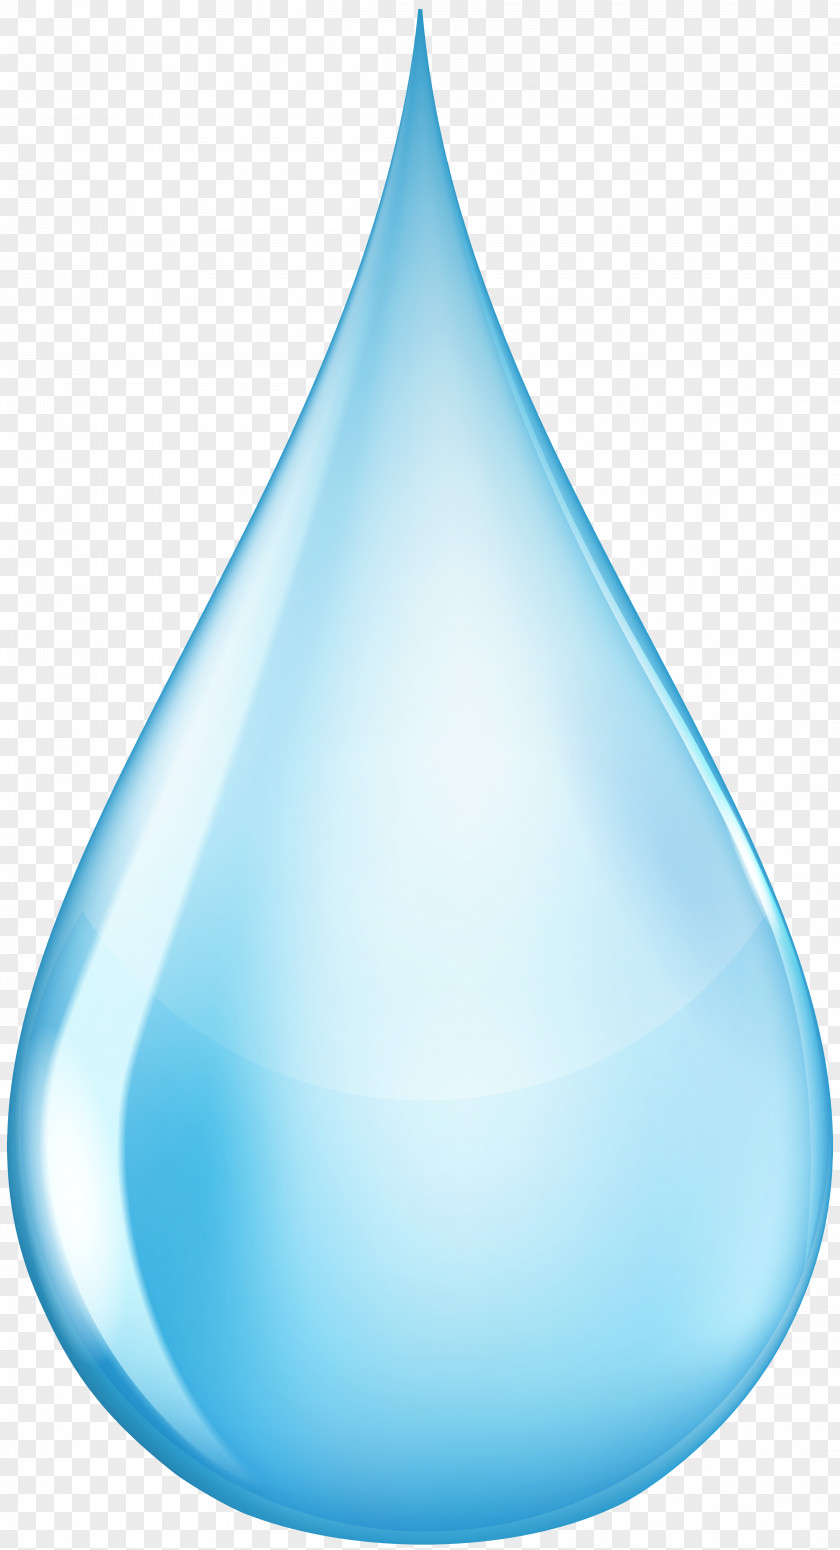 Drops Water Turquoise Teal Liquid PNG